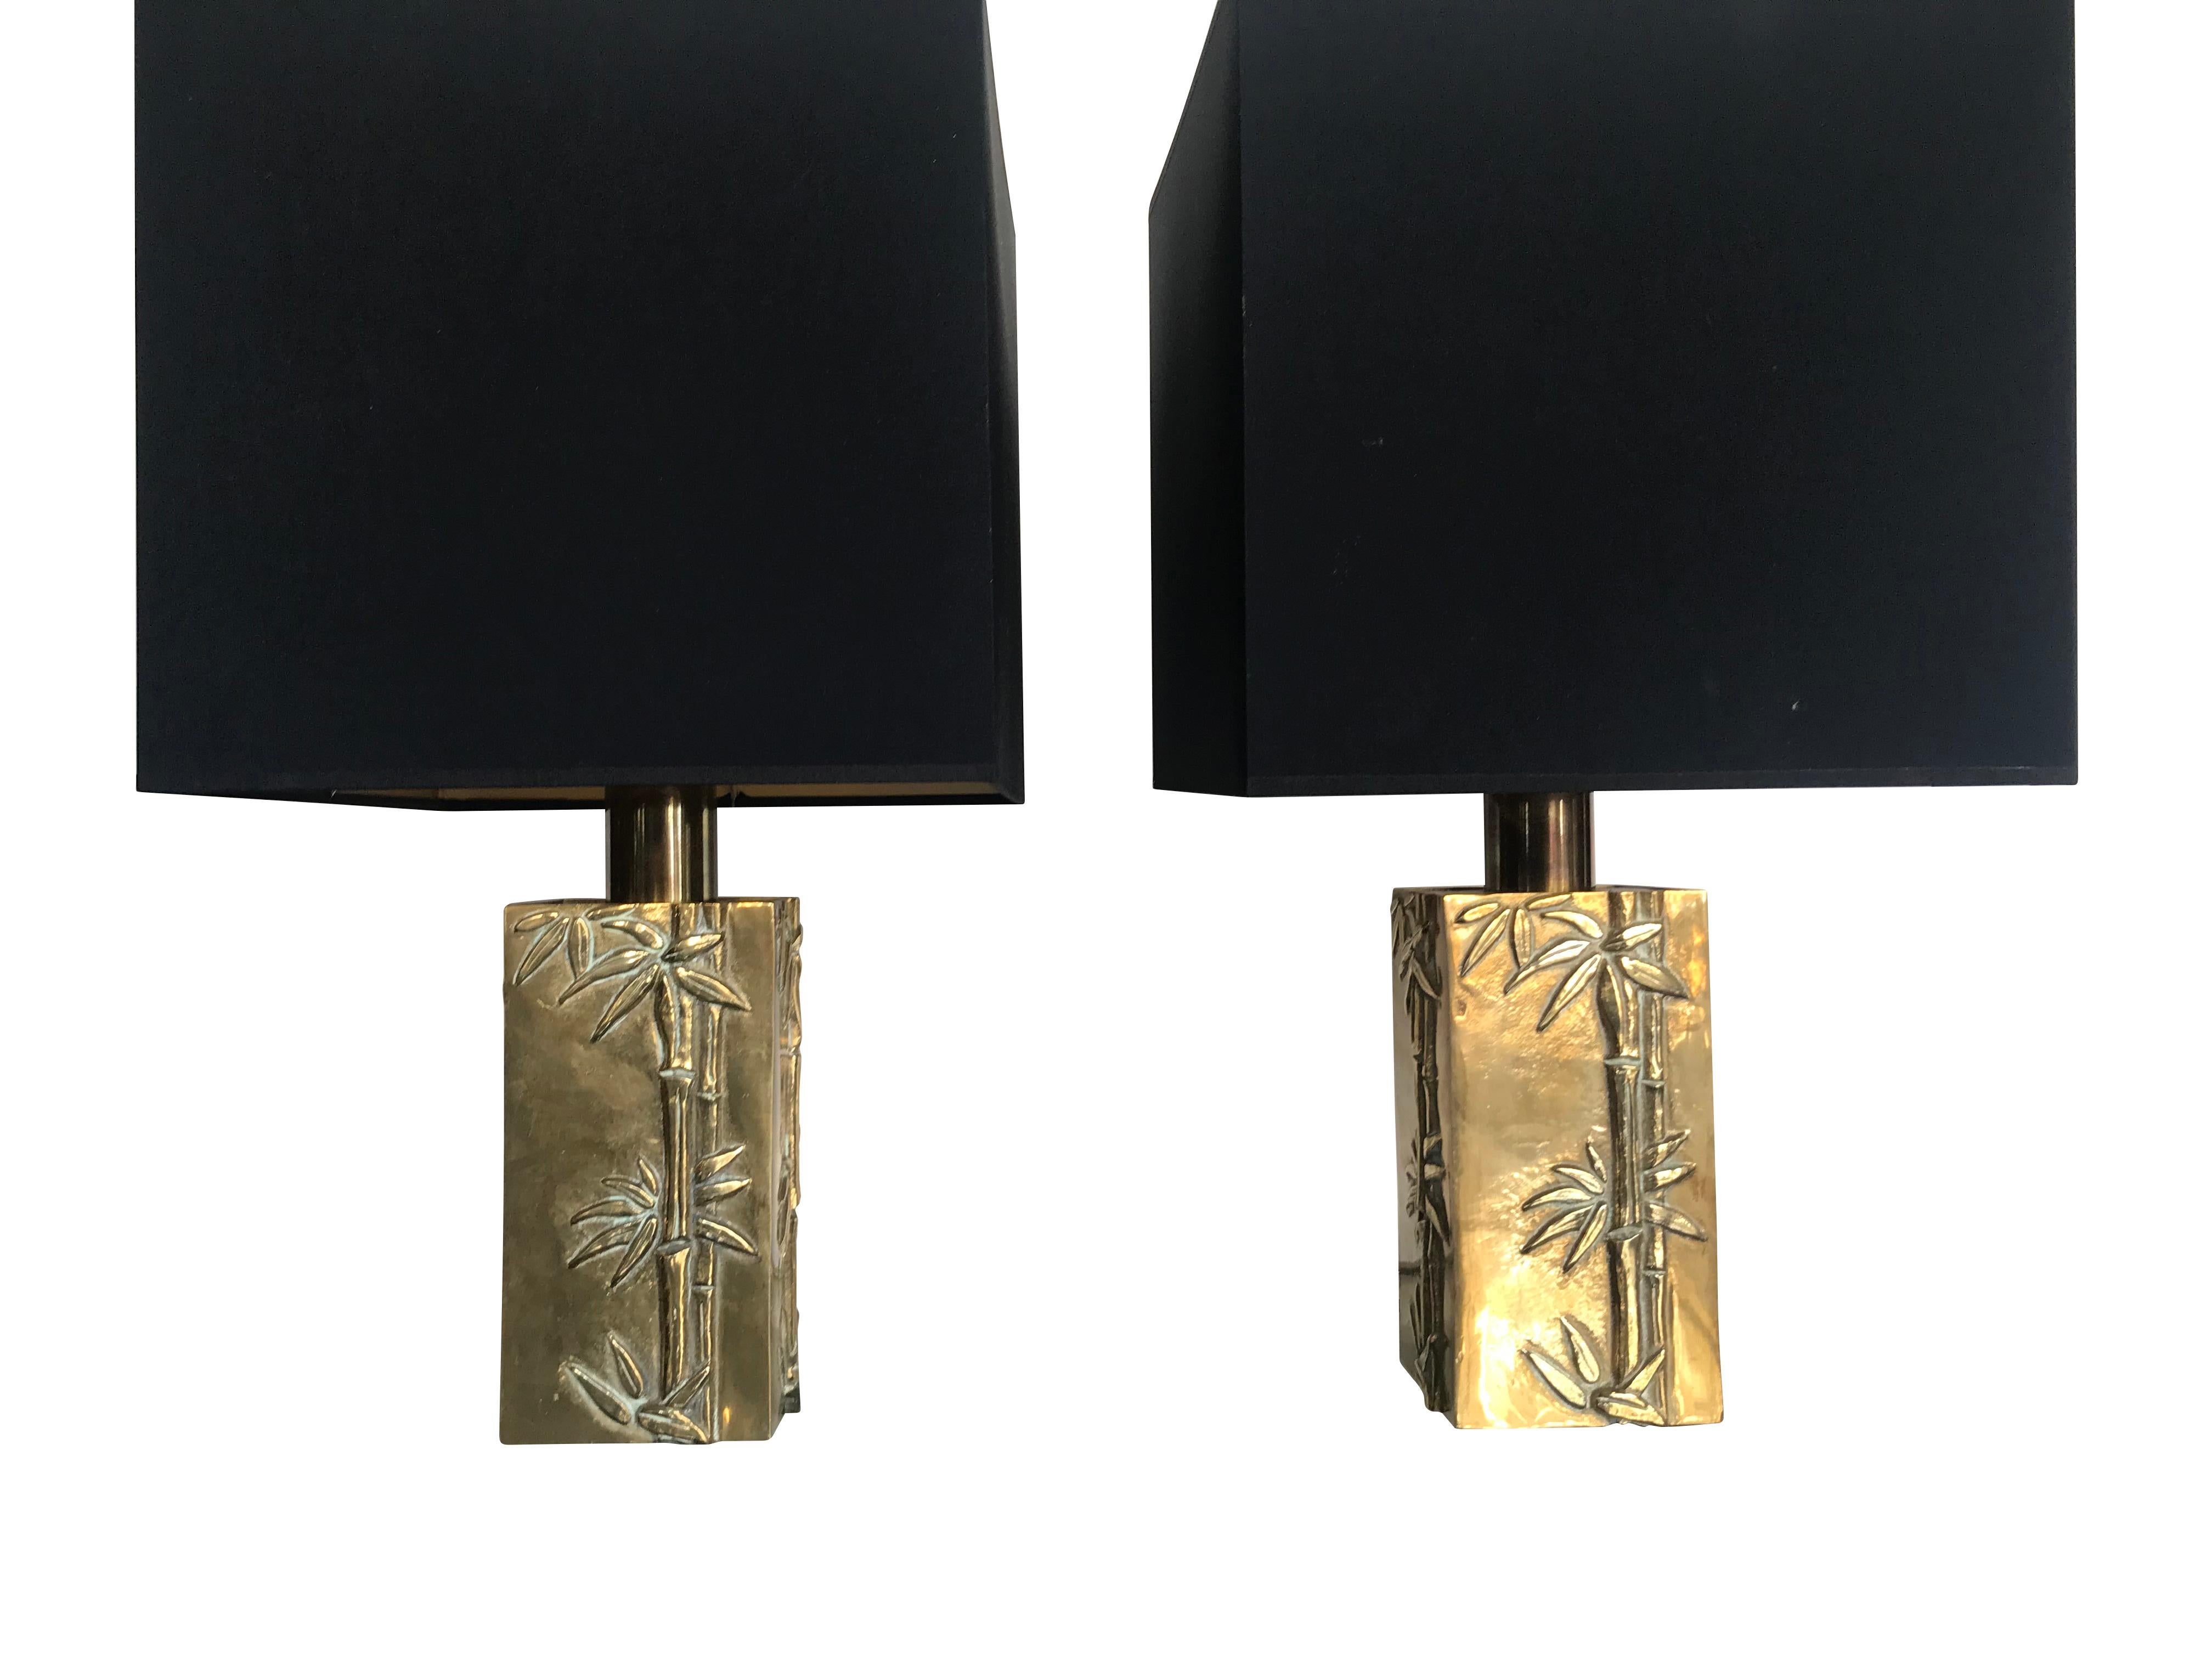 A pair of Italian solid brass lamps with bamboo relief design and brass fittings, by Pragos, Italy. With new bespoke black shades with gold linings. Re wired with antique gold cord flex and PAT tested. 

 